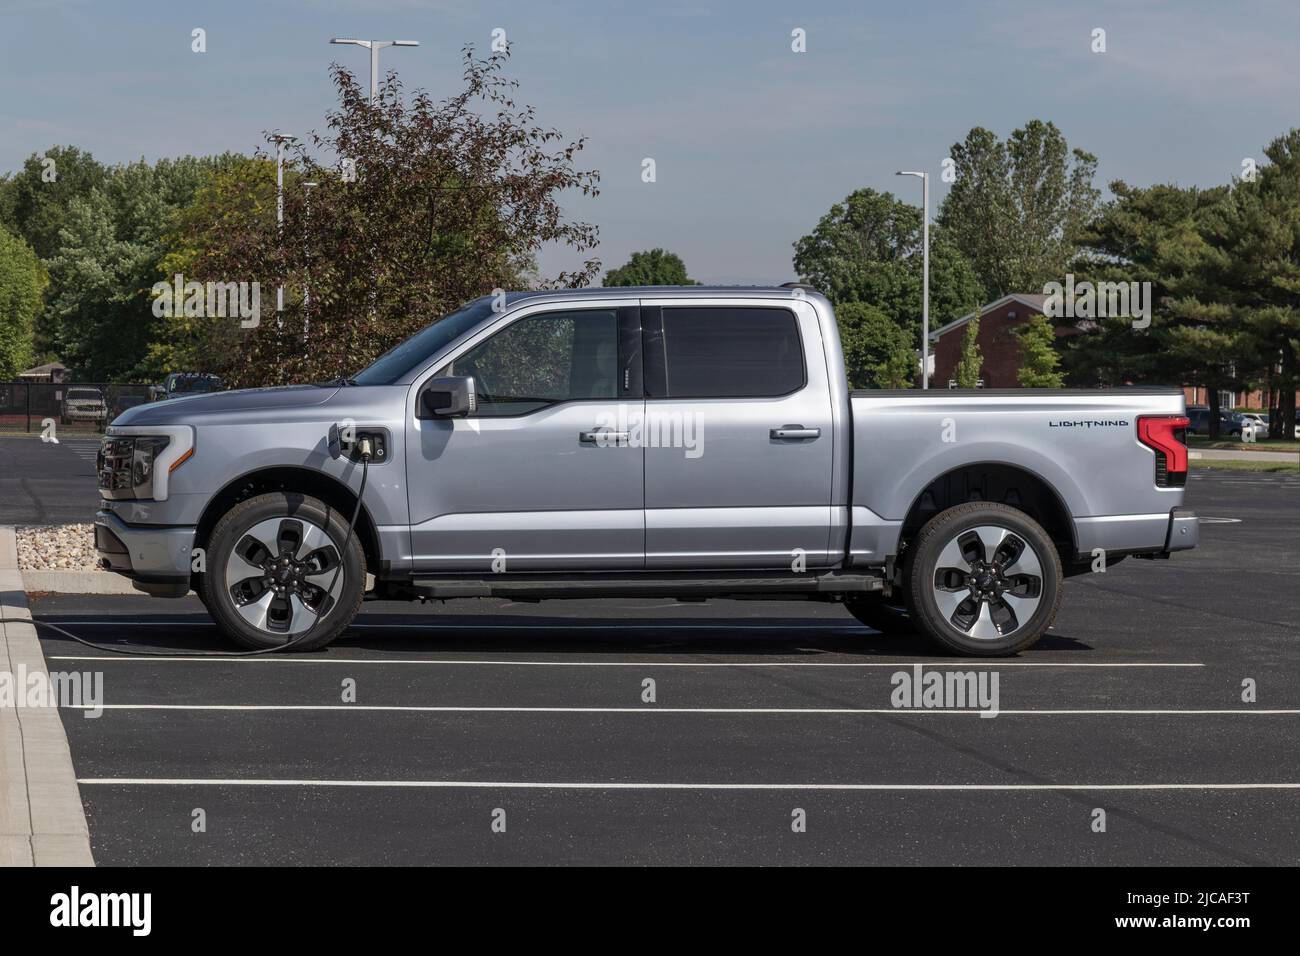 Kokomo - Circa June 2022: Ford F-150 Lightning display. Ford offers the F150 Lightning all-electric truck in Pro, XLT, Lariat, and Platinum models. Stock Photo